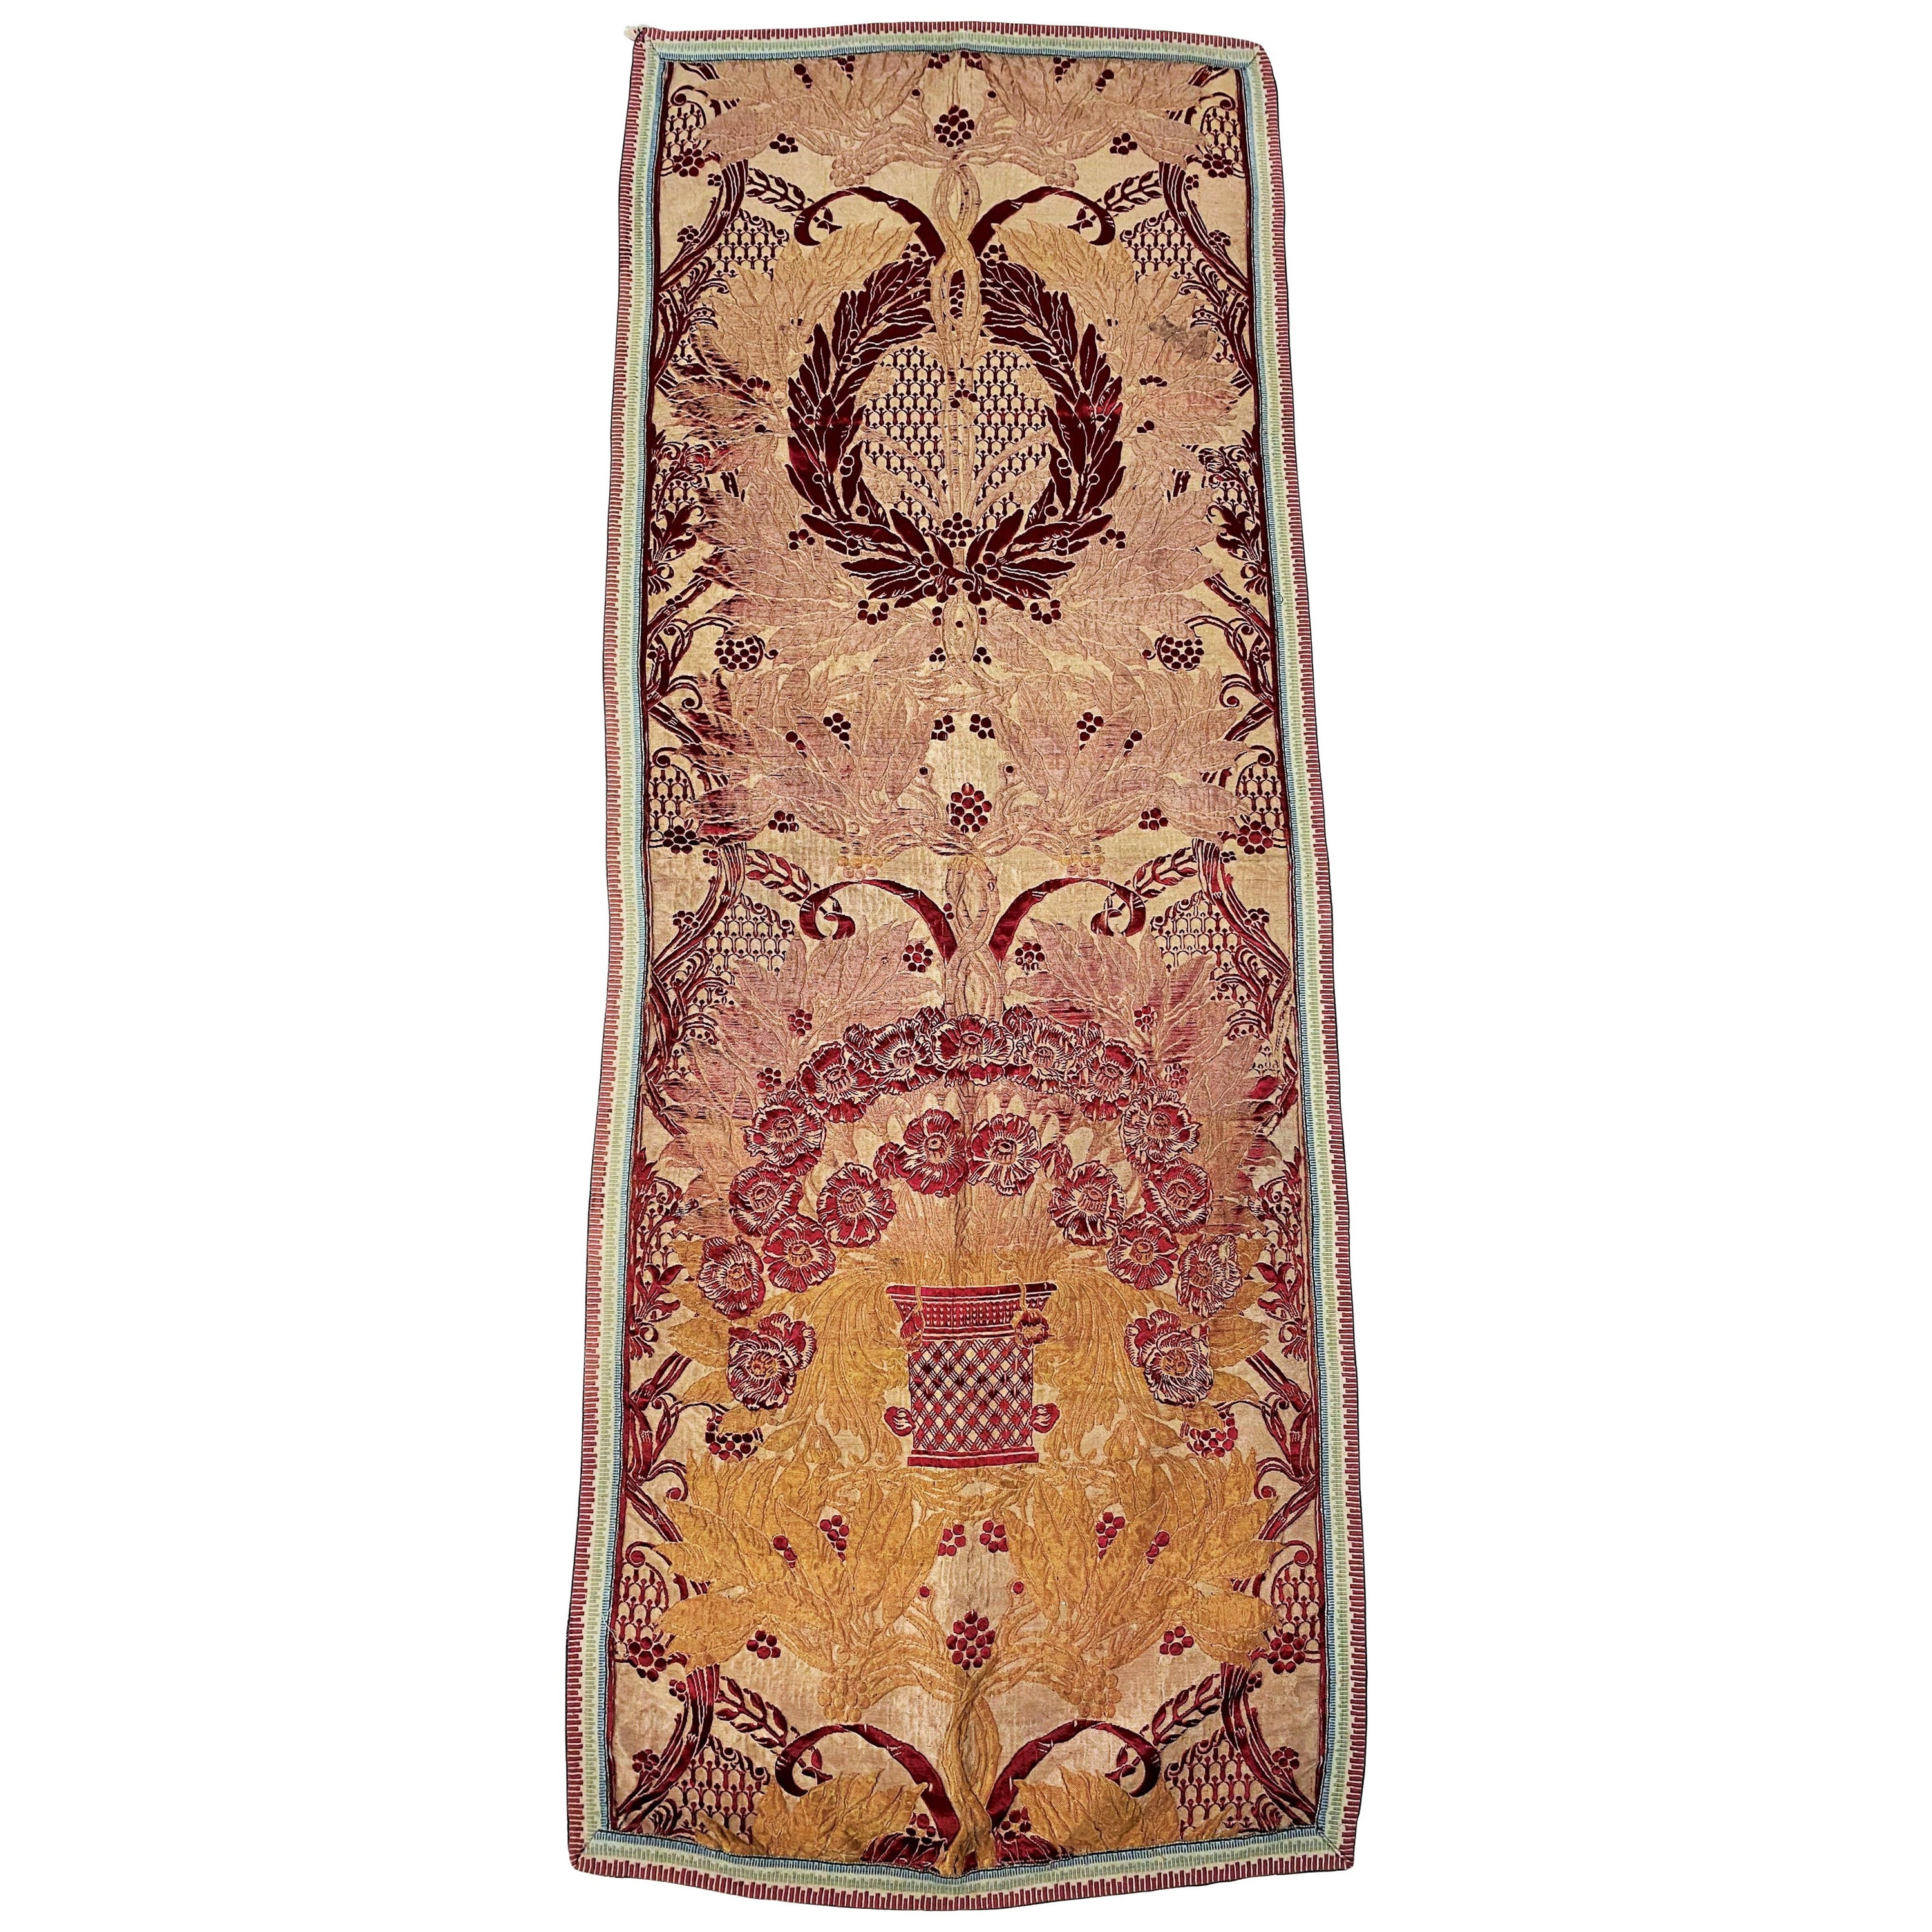 A French Art Nouveau Brocaded Silk by Adrien Karbowsky - Tassinari & Chatel 1899 For Sale